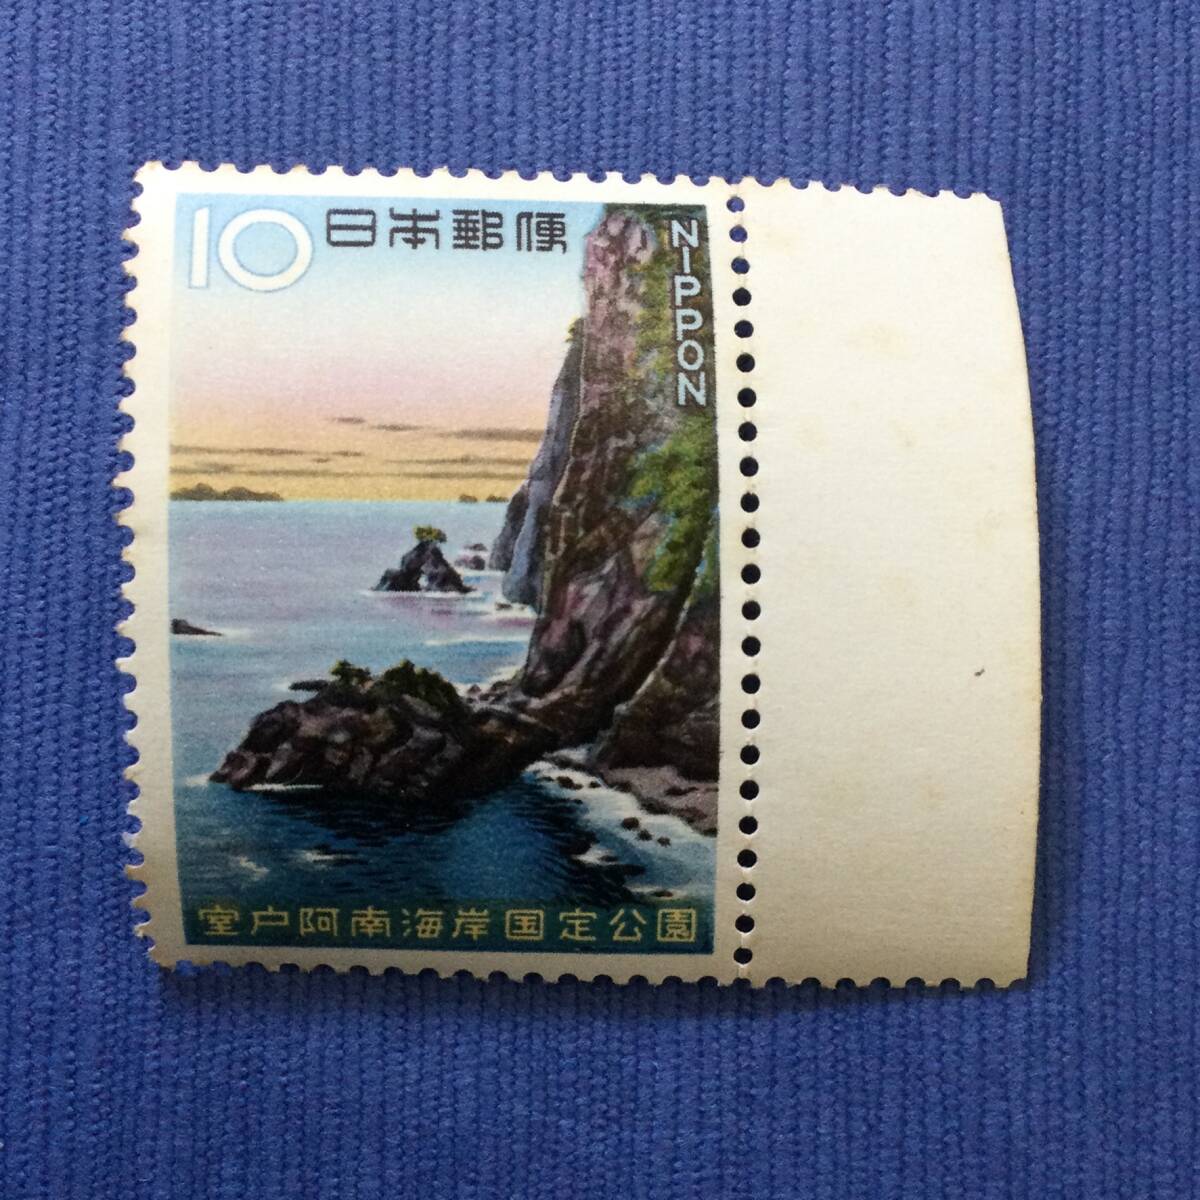  quasi-national park stamp . door . southern sea .10 jpy ear attaching 